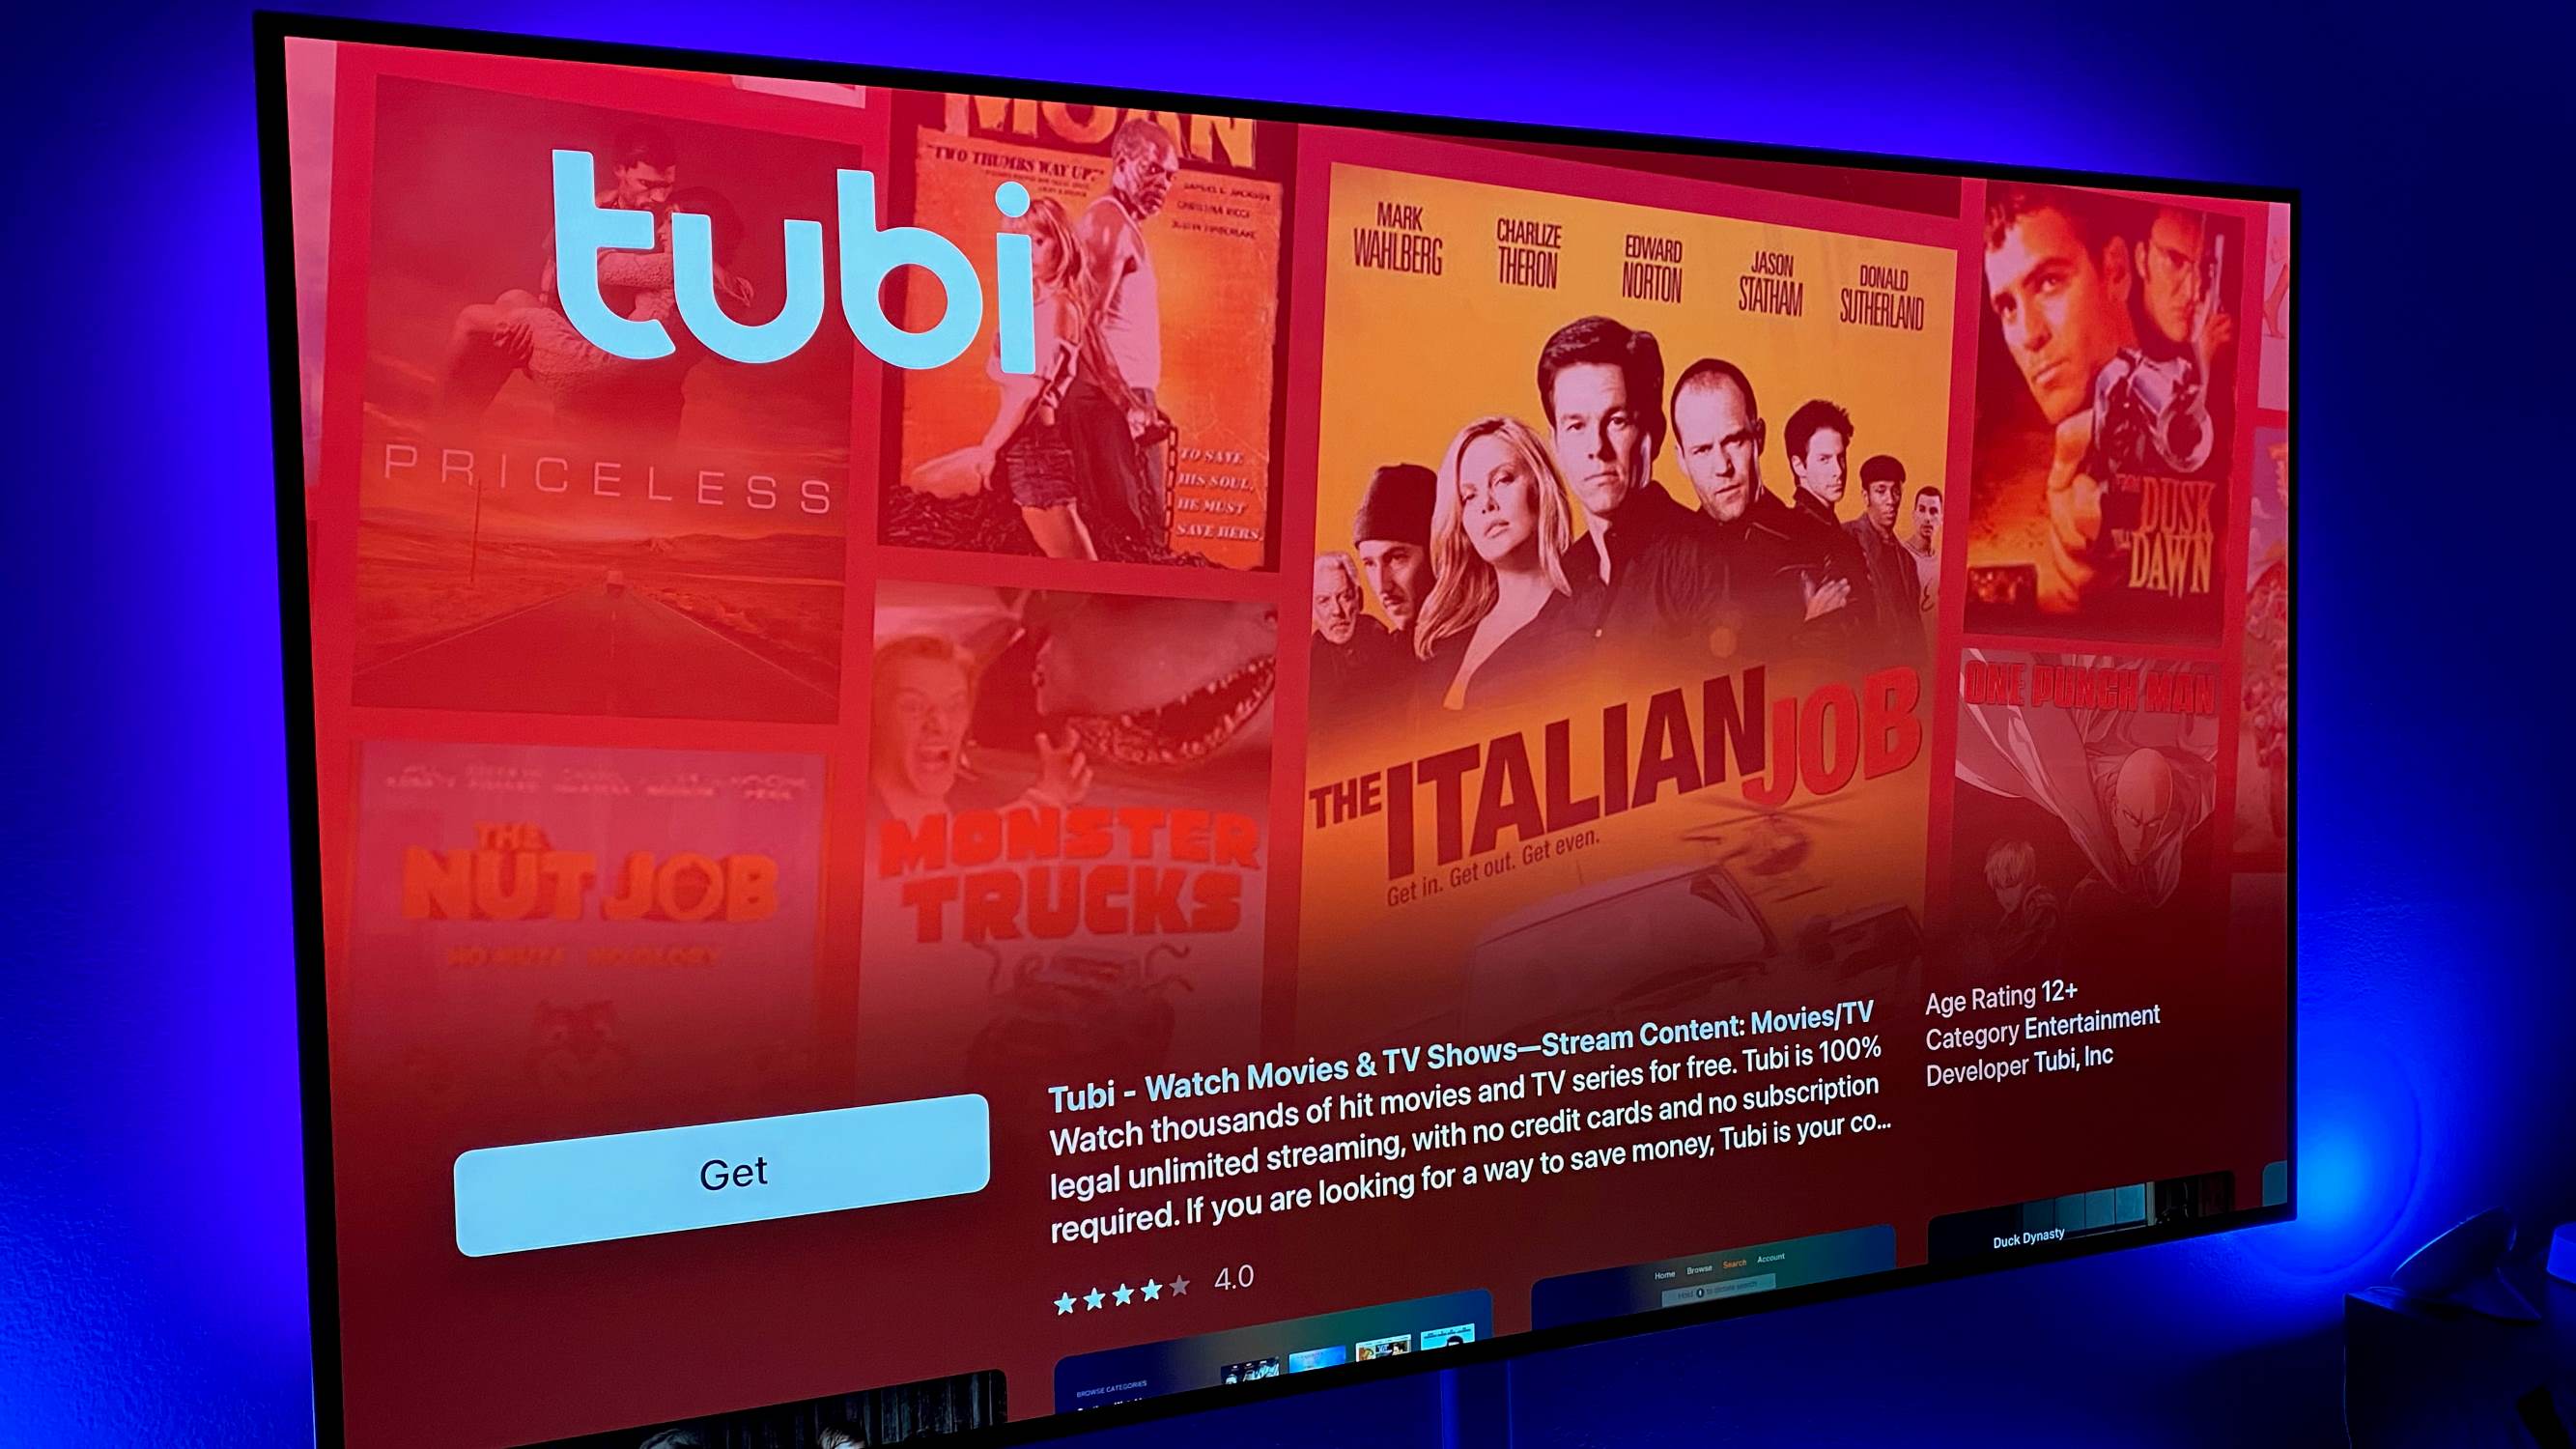 Tubi Experiences Remarkable Growth, Surpasses 74 Million Monthly Active Users